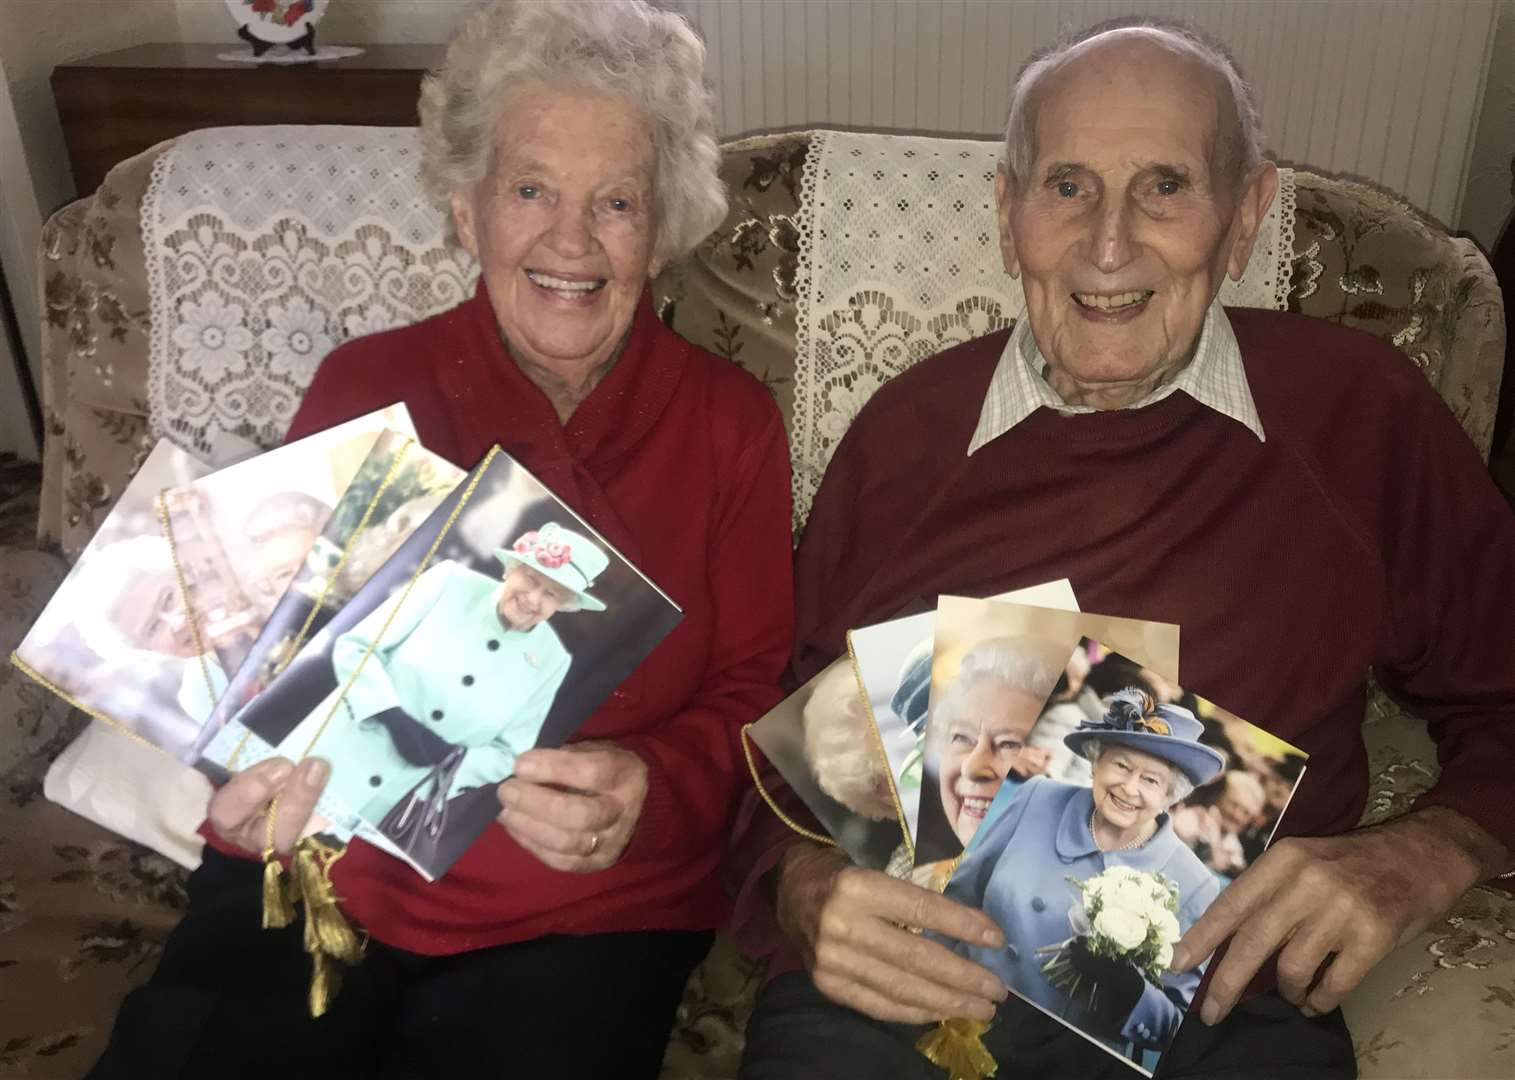 Jenny and Percy Lawrence received their eighth card from The Queen on their 75th wedding anniversary in November 2019